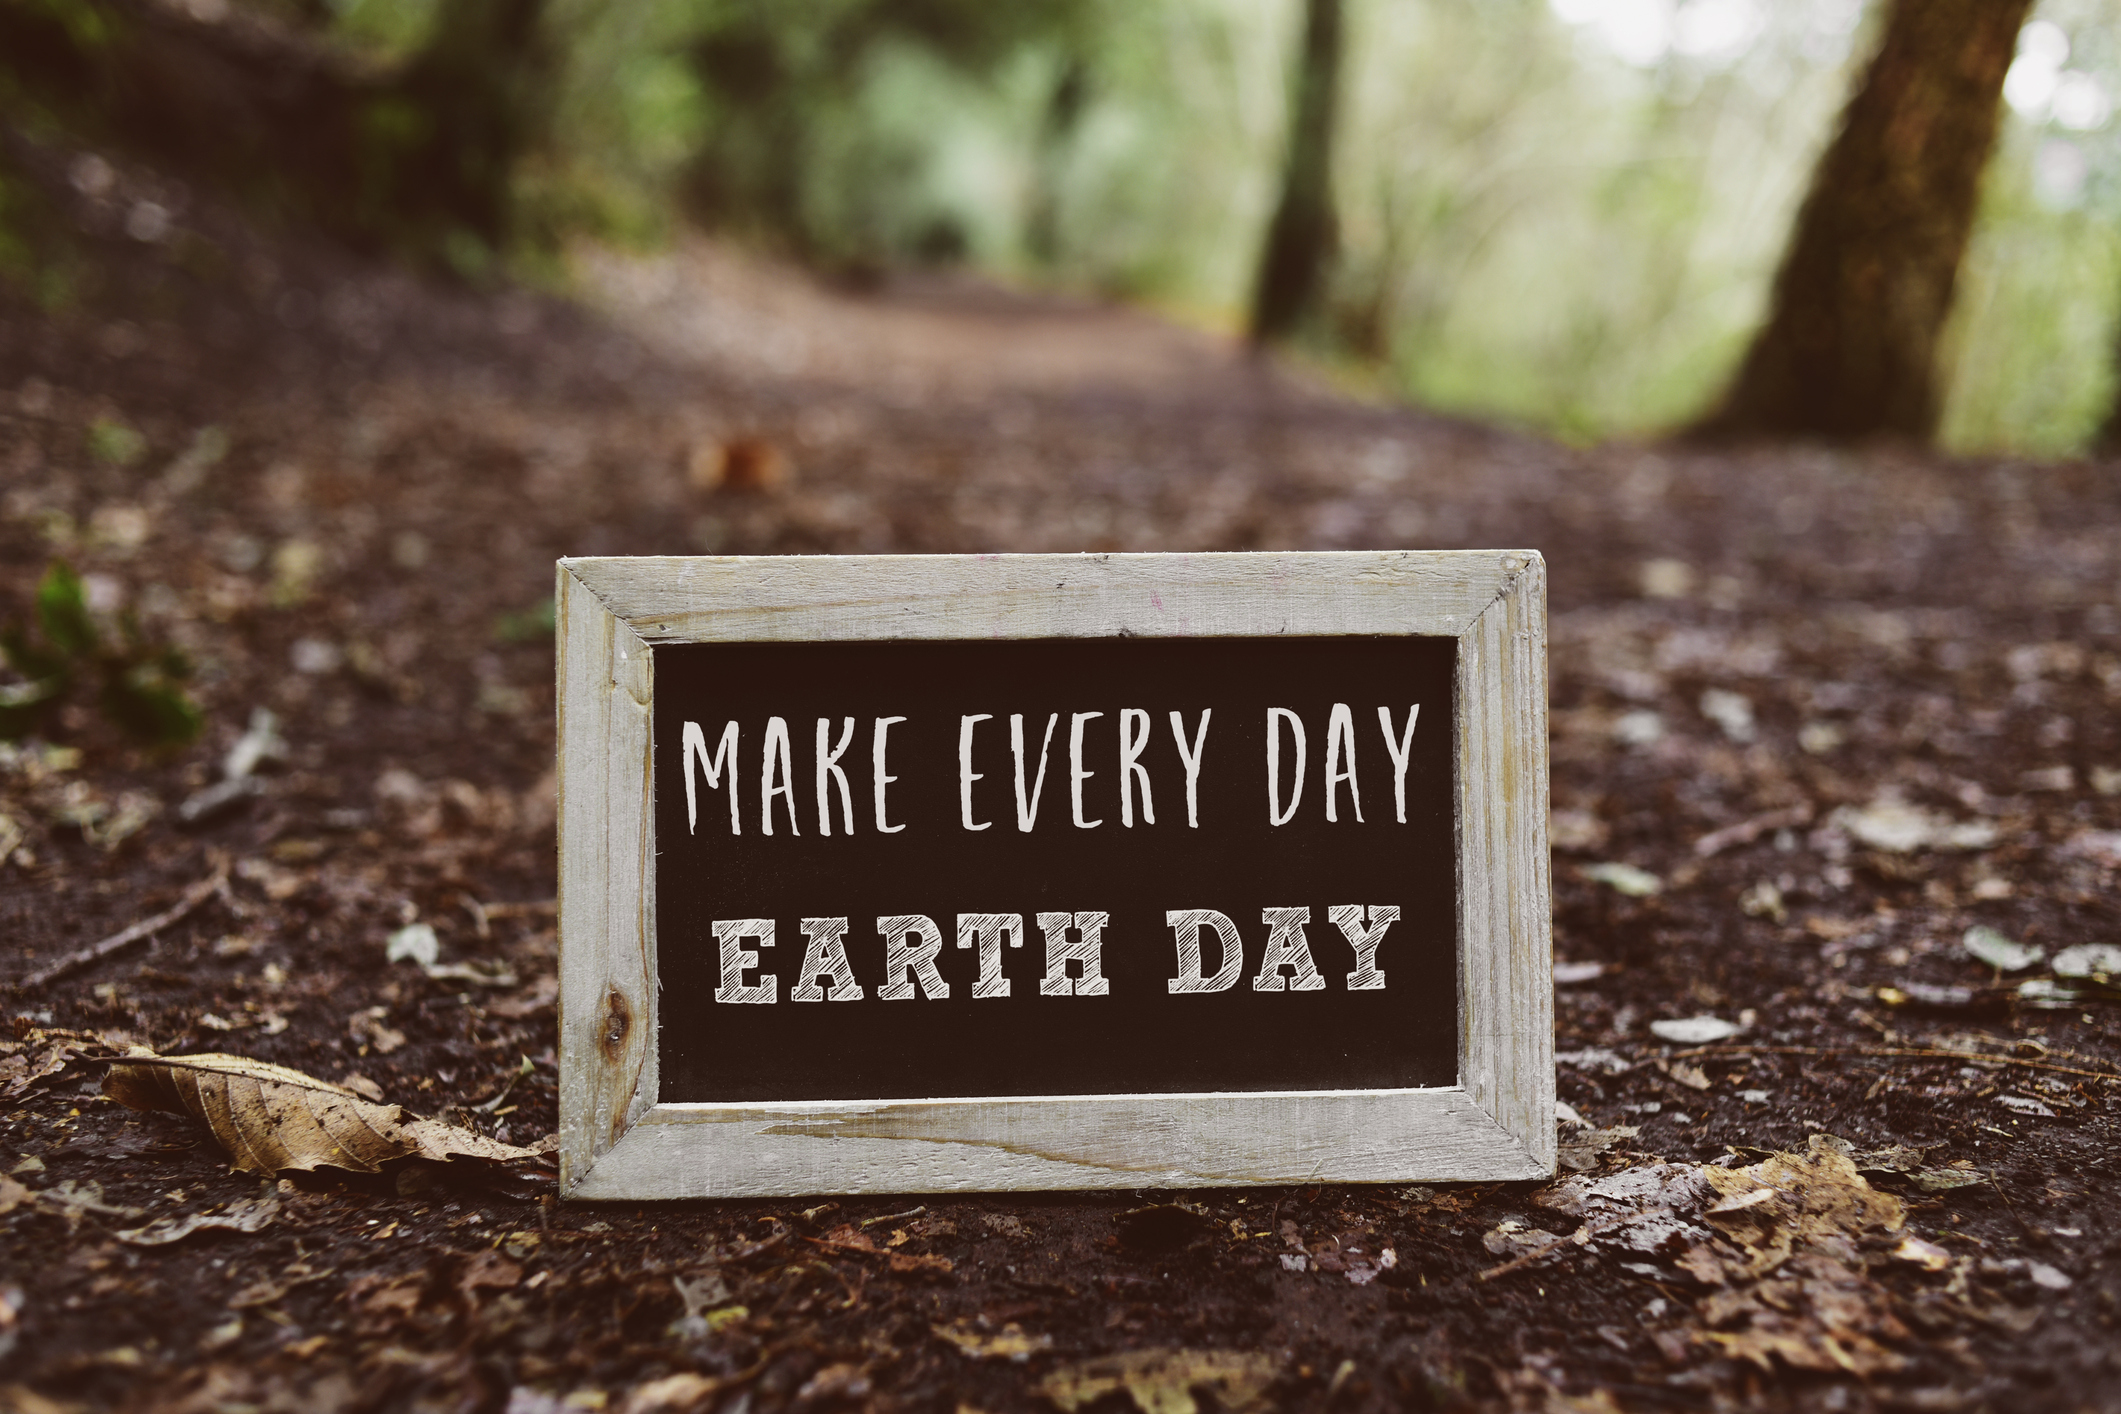 “Organizations Can Honor ‘Earth Day’ Every Day”